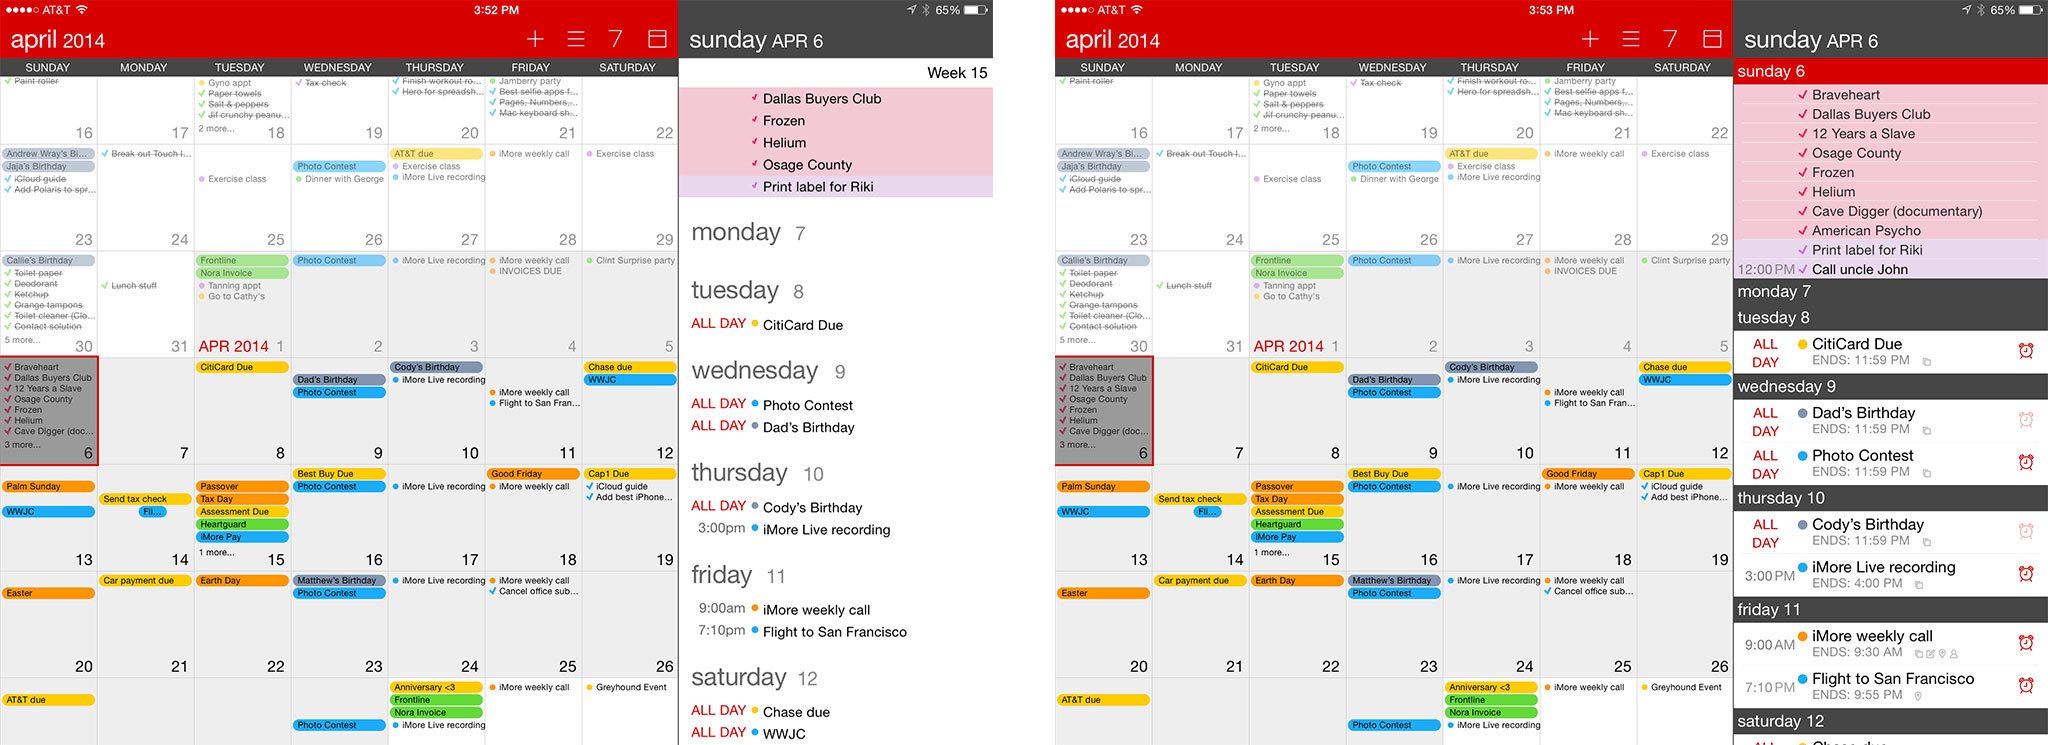 Best Calendar Apps For Ipad Fantastical 2 Sunrise Calendars 5 And More Imore